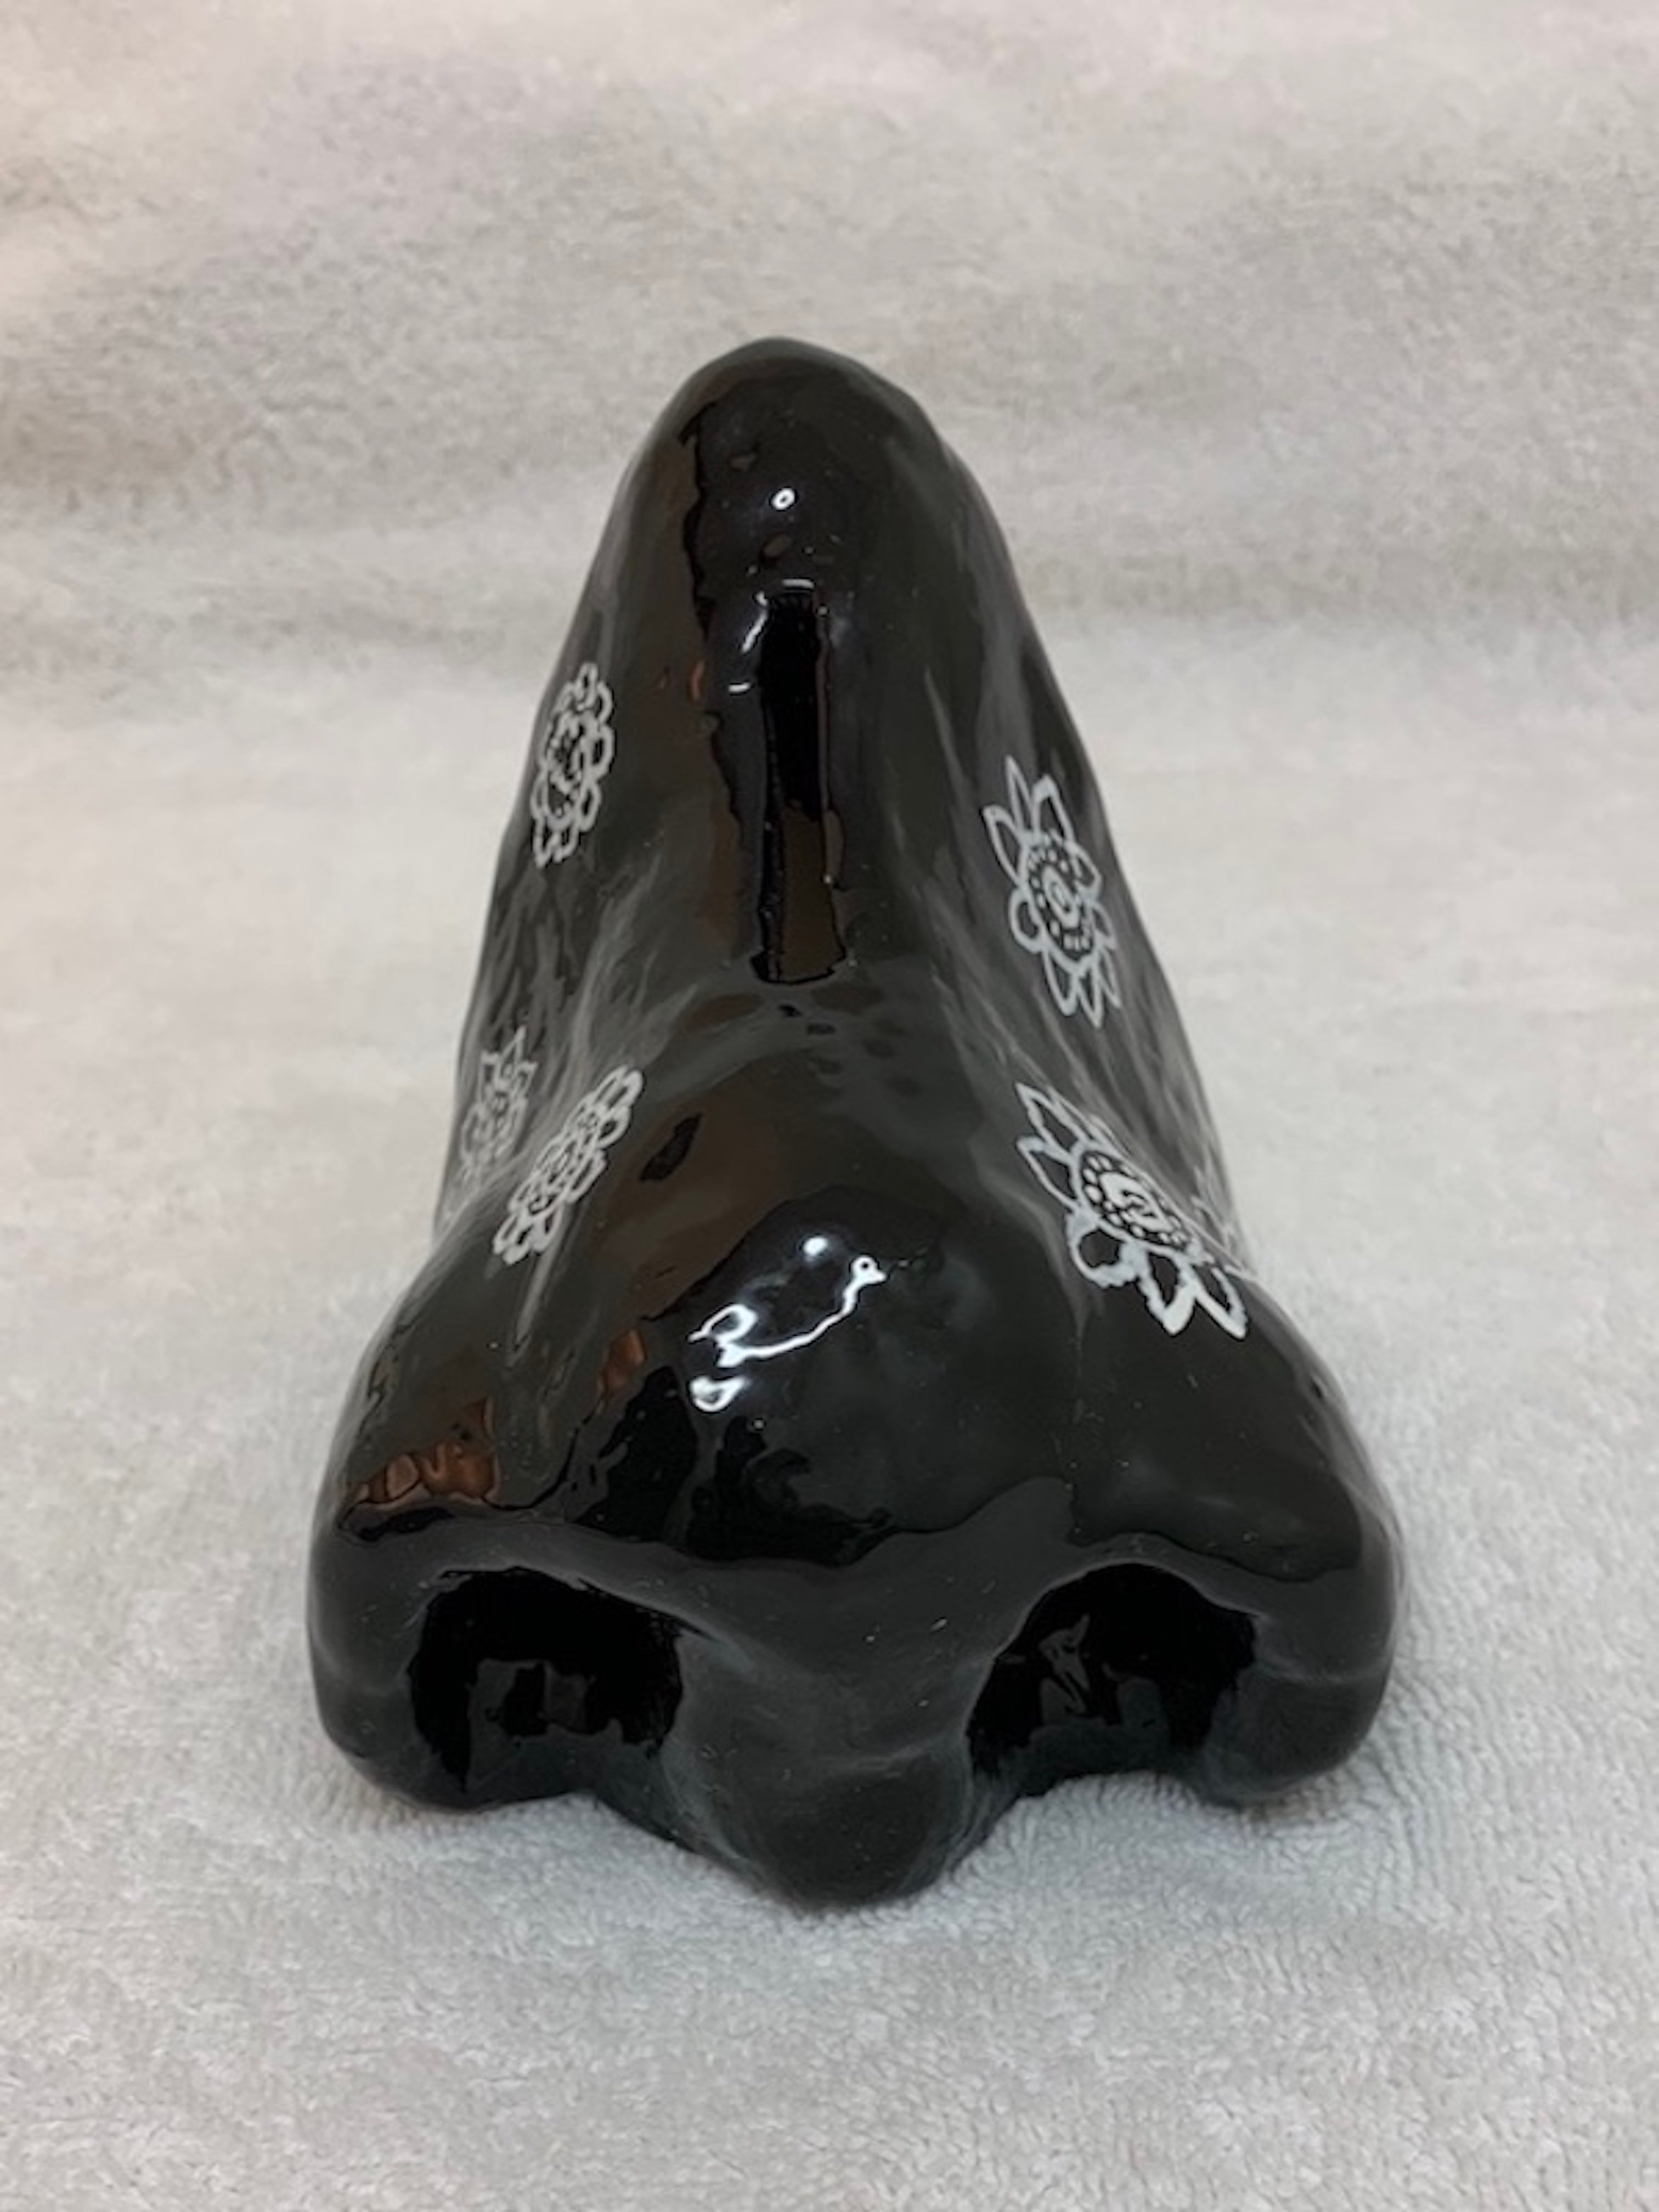 a ceramic sculpture of a black nose decorated with four white floral-like designs